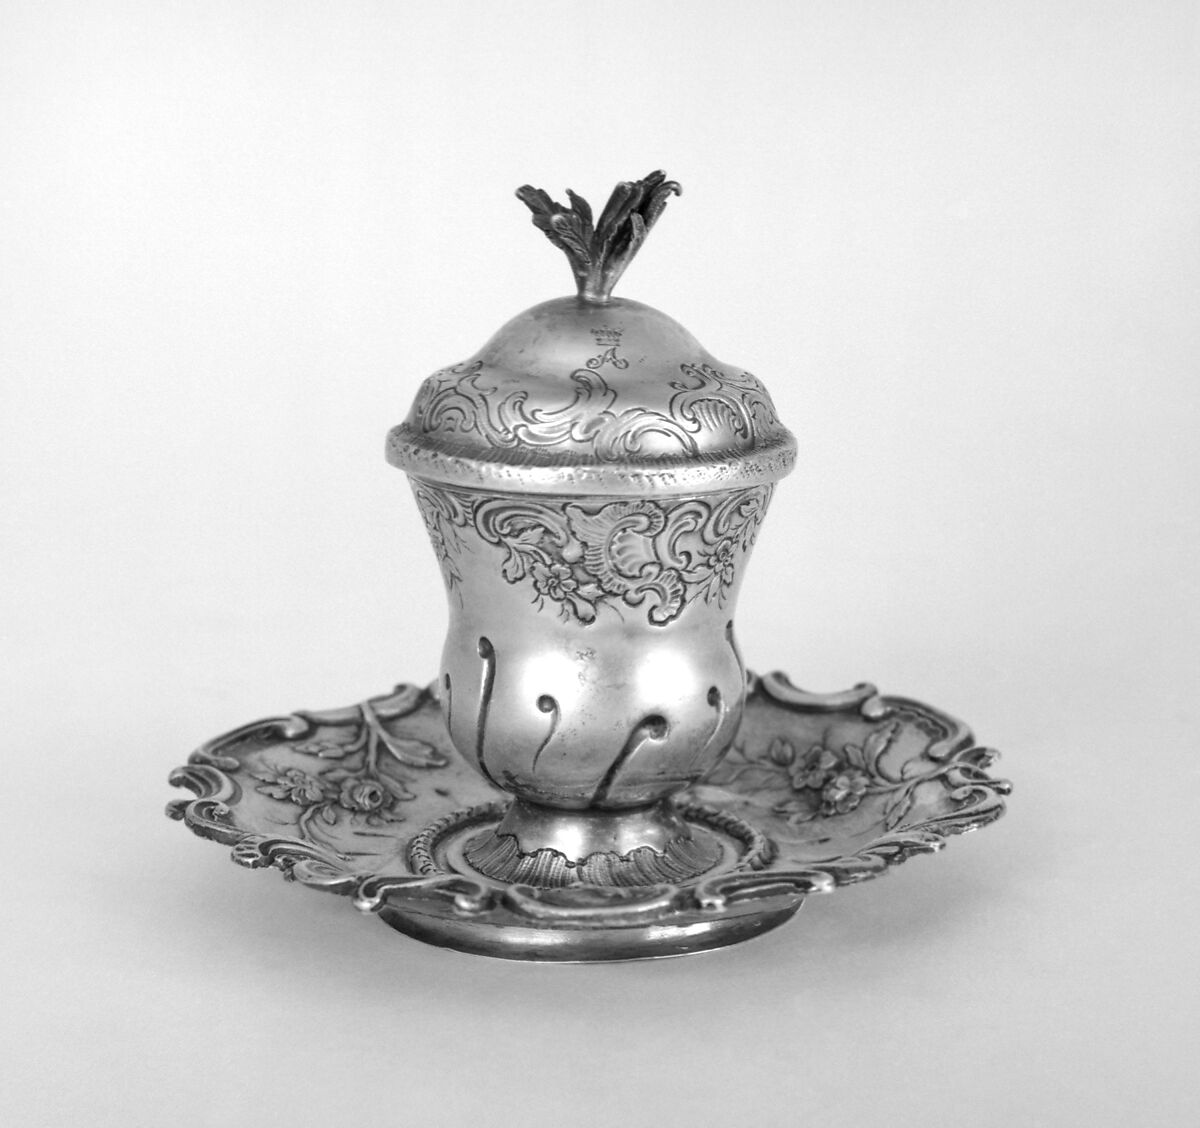 Urn-shaped inkwell with cover on stand, Abraham Drentwett IV (1711–1785, master 1741), Silver gilt, German, Augsburg 